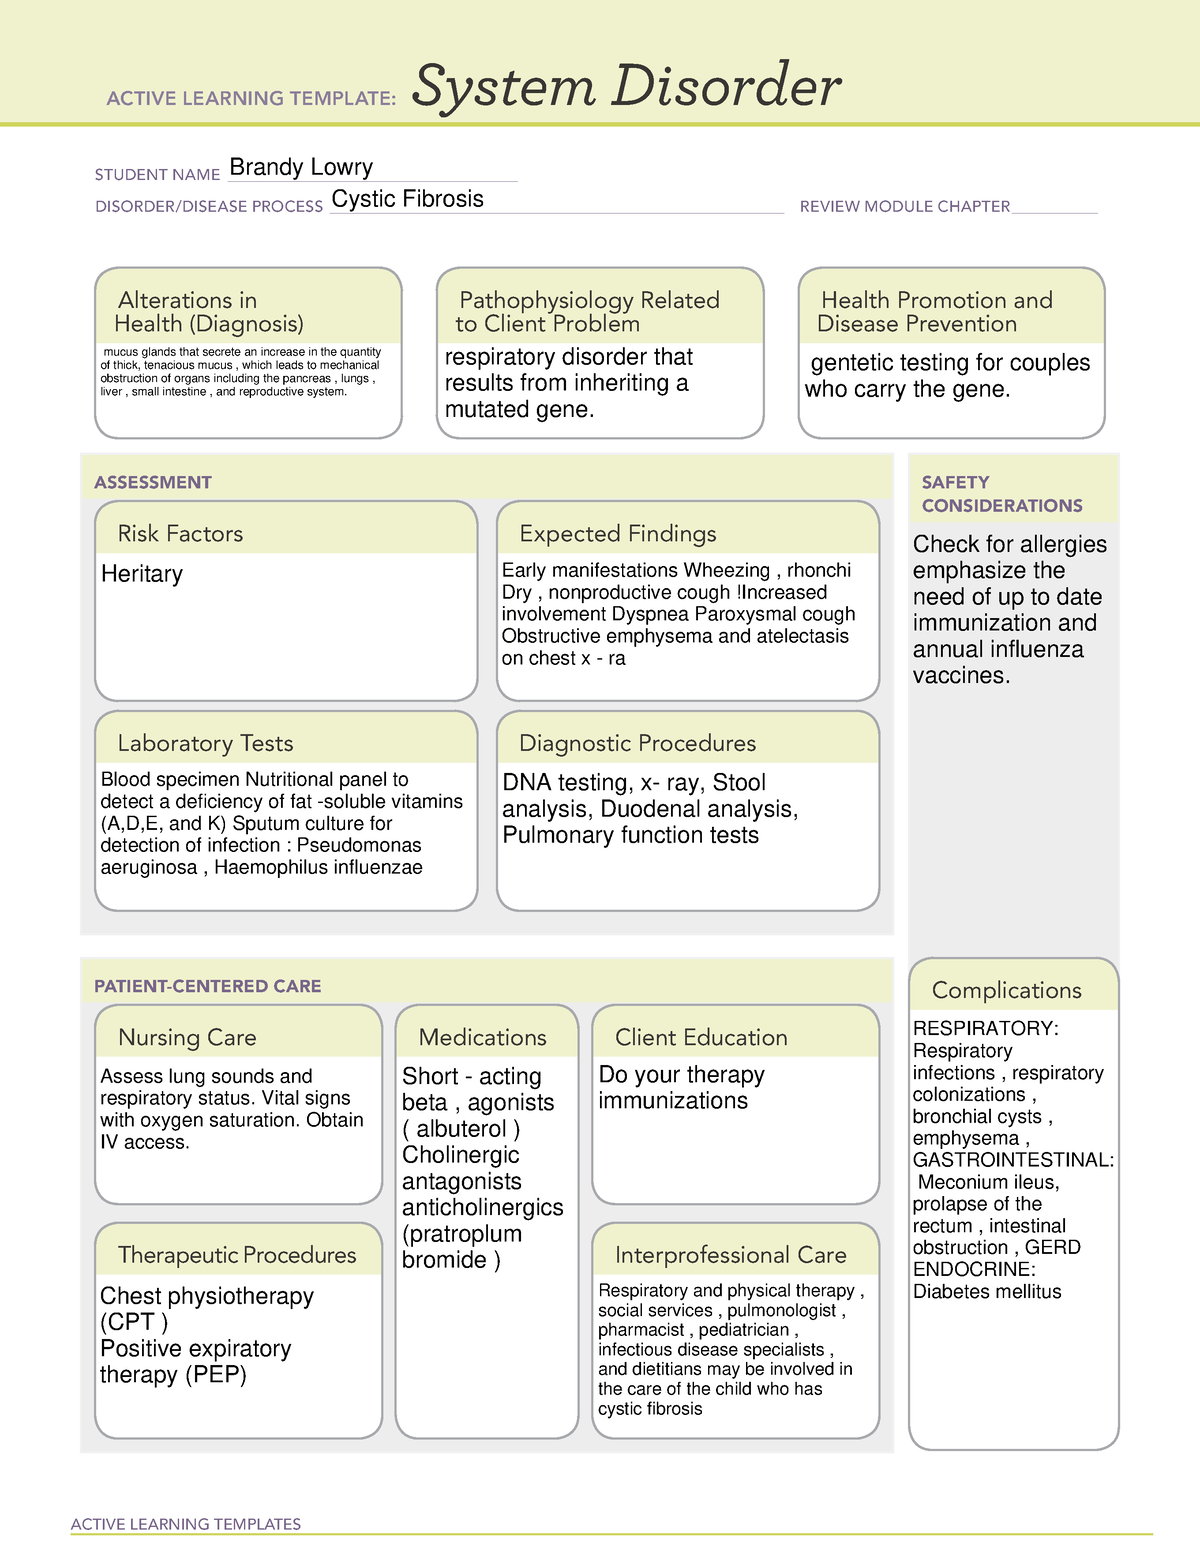 ALT system disorder Cystic Fibrosis ACTIVE LEARNING TEMPLATES